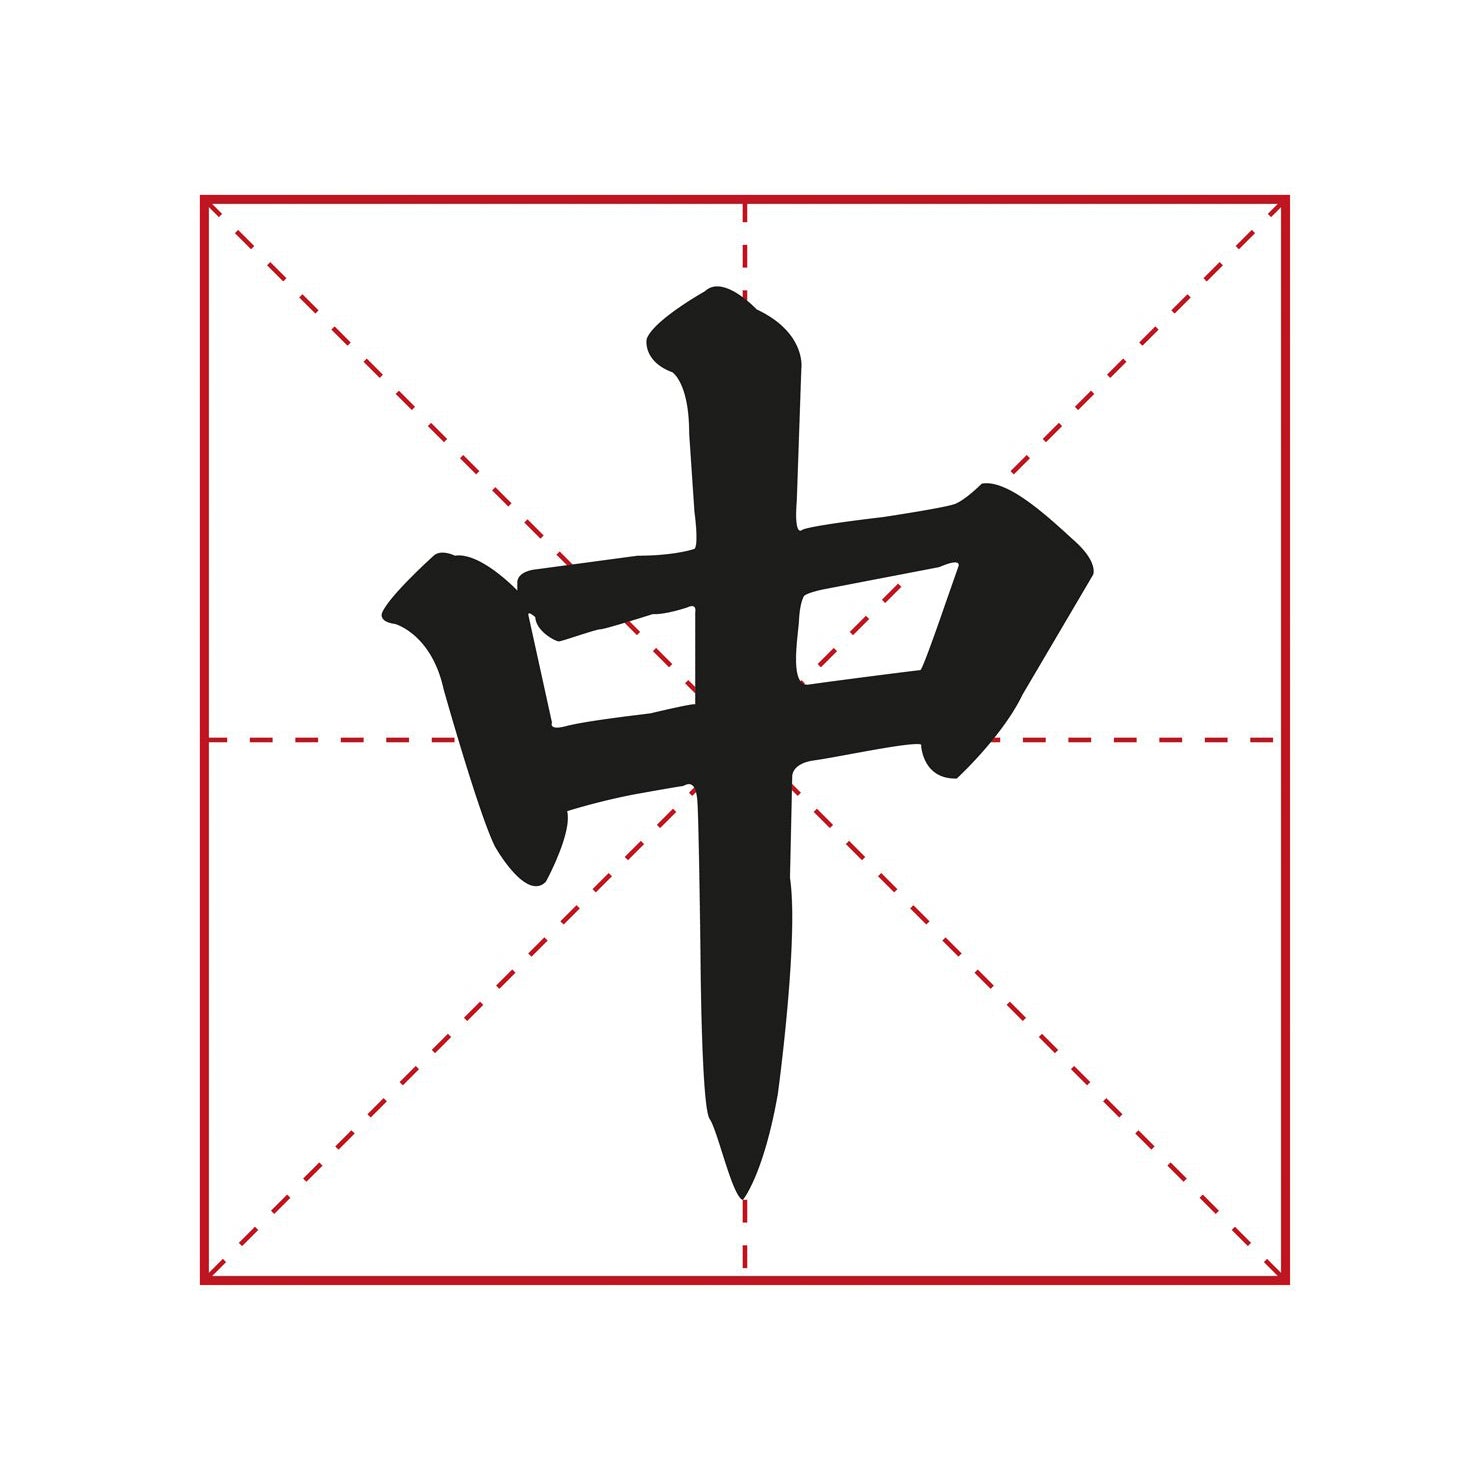 illustration of a chinese character written by the great calligrapher liu gongquan in kaishu calligraphy style